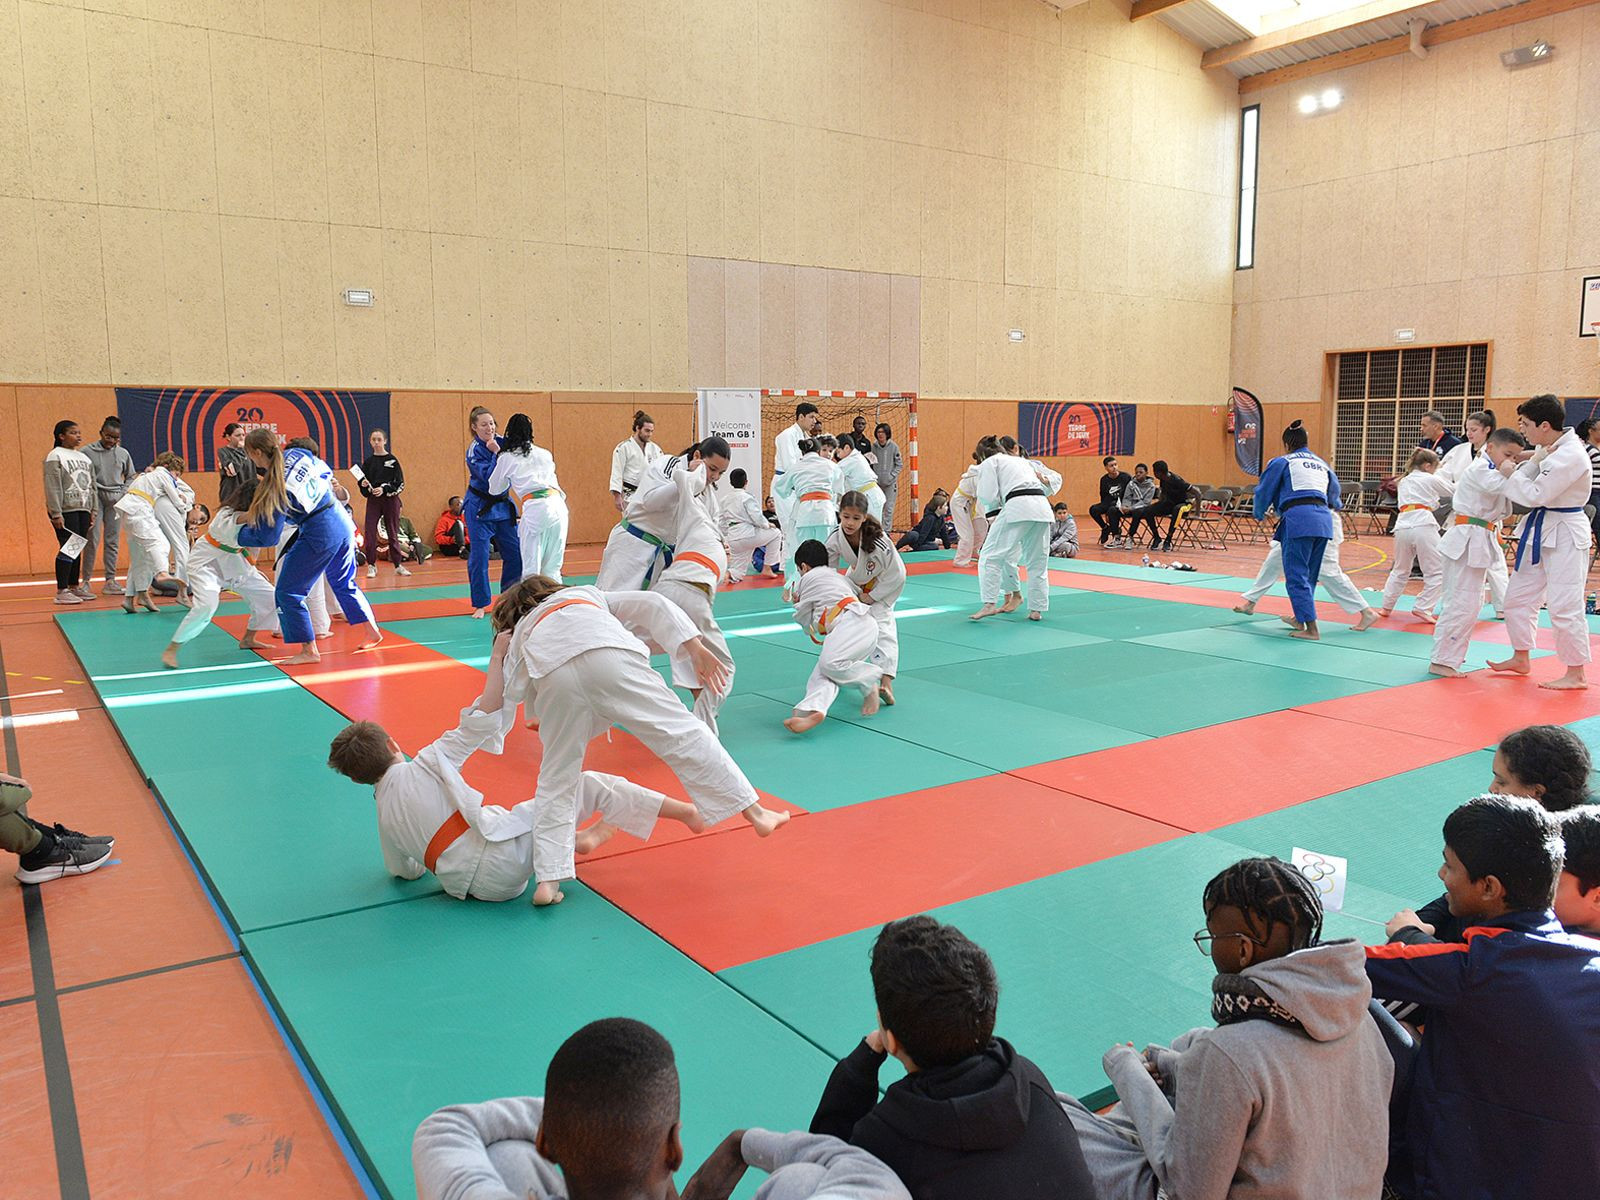 Judokas who hope to be members of Team GB at Paris 2024 ran a number of training sessions for children at Lycée René Auffray school in Clichy ©Team GB